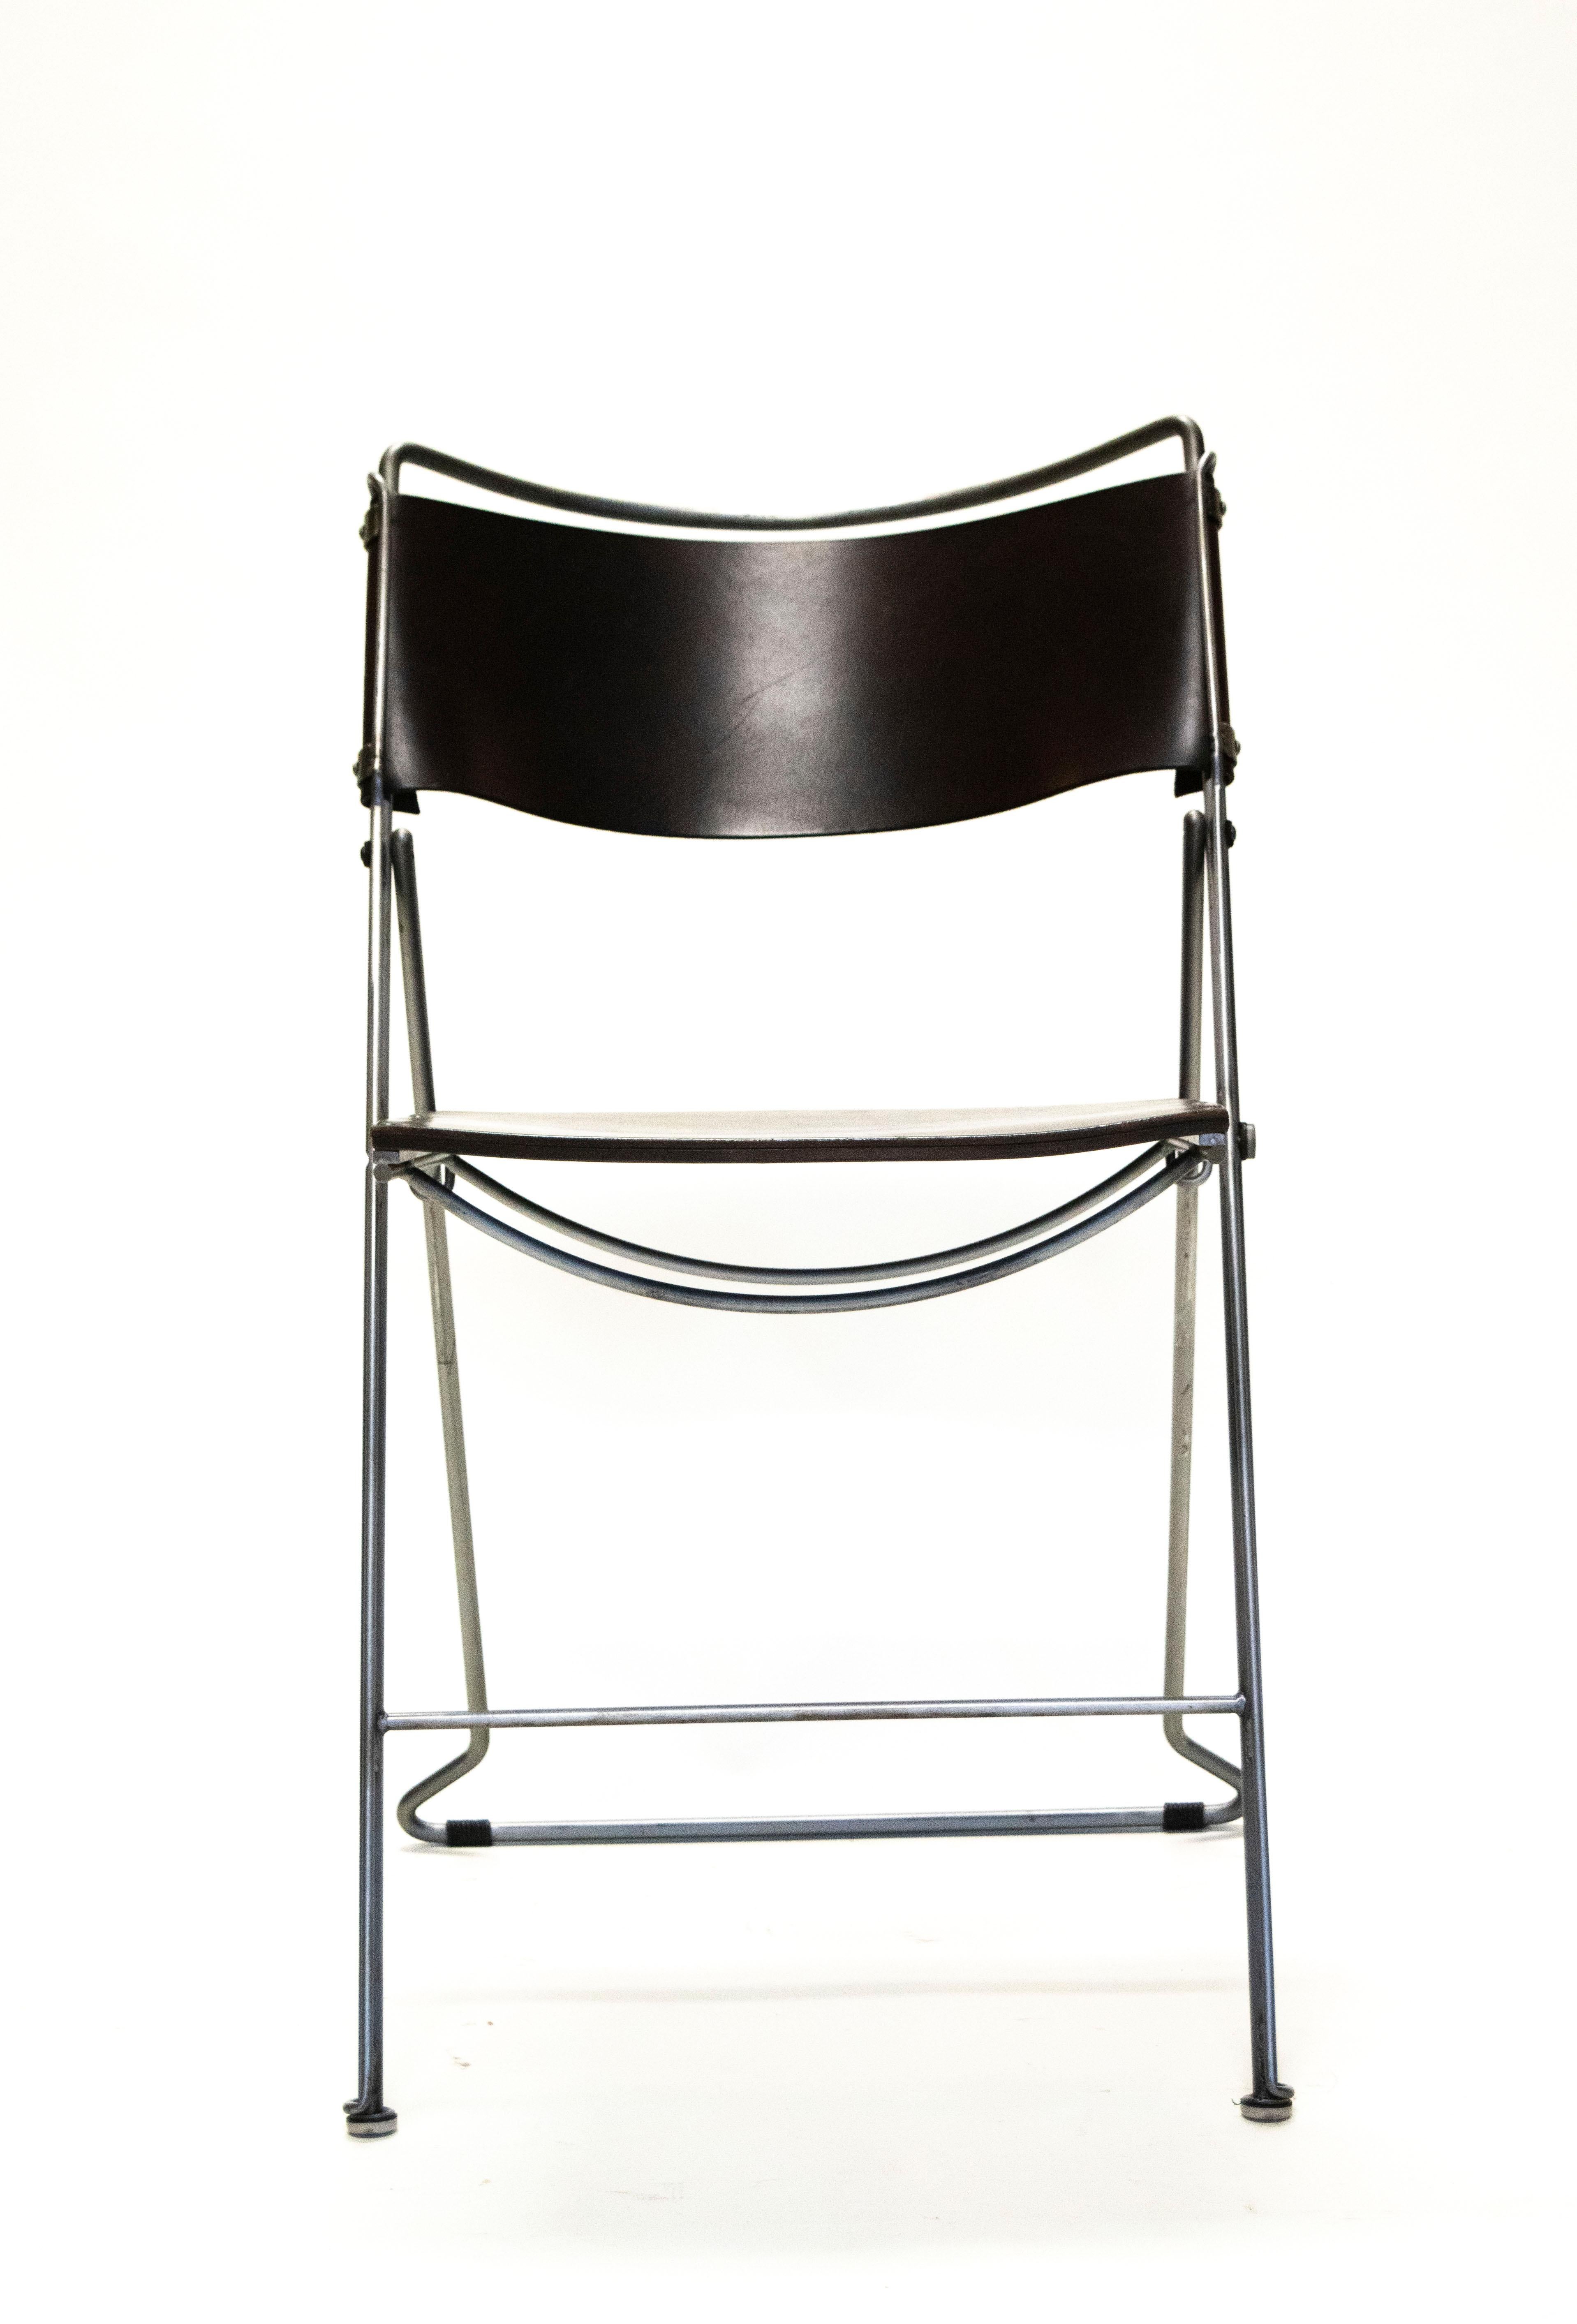 Folding chair in cold-rolled steel and vegetable-tanned bridle leather.
Leather color is Havana